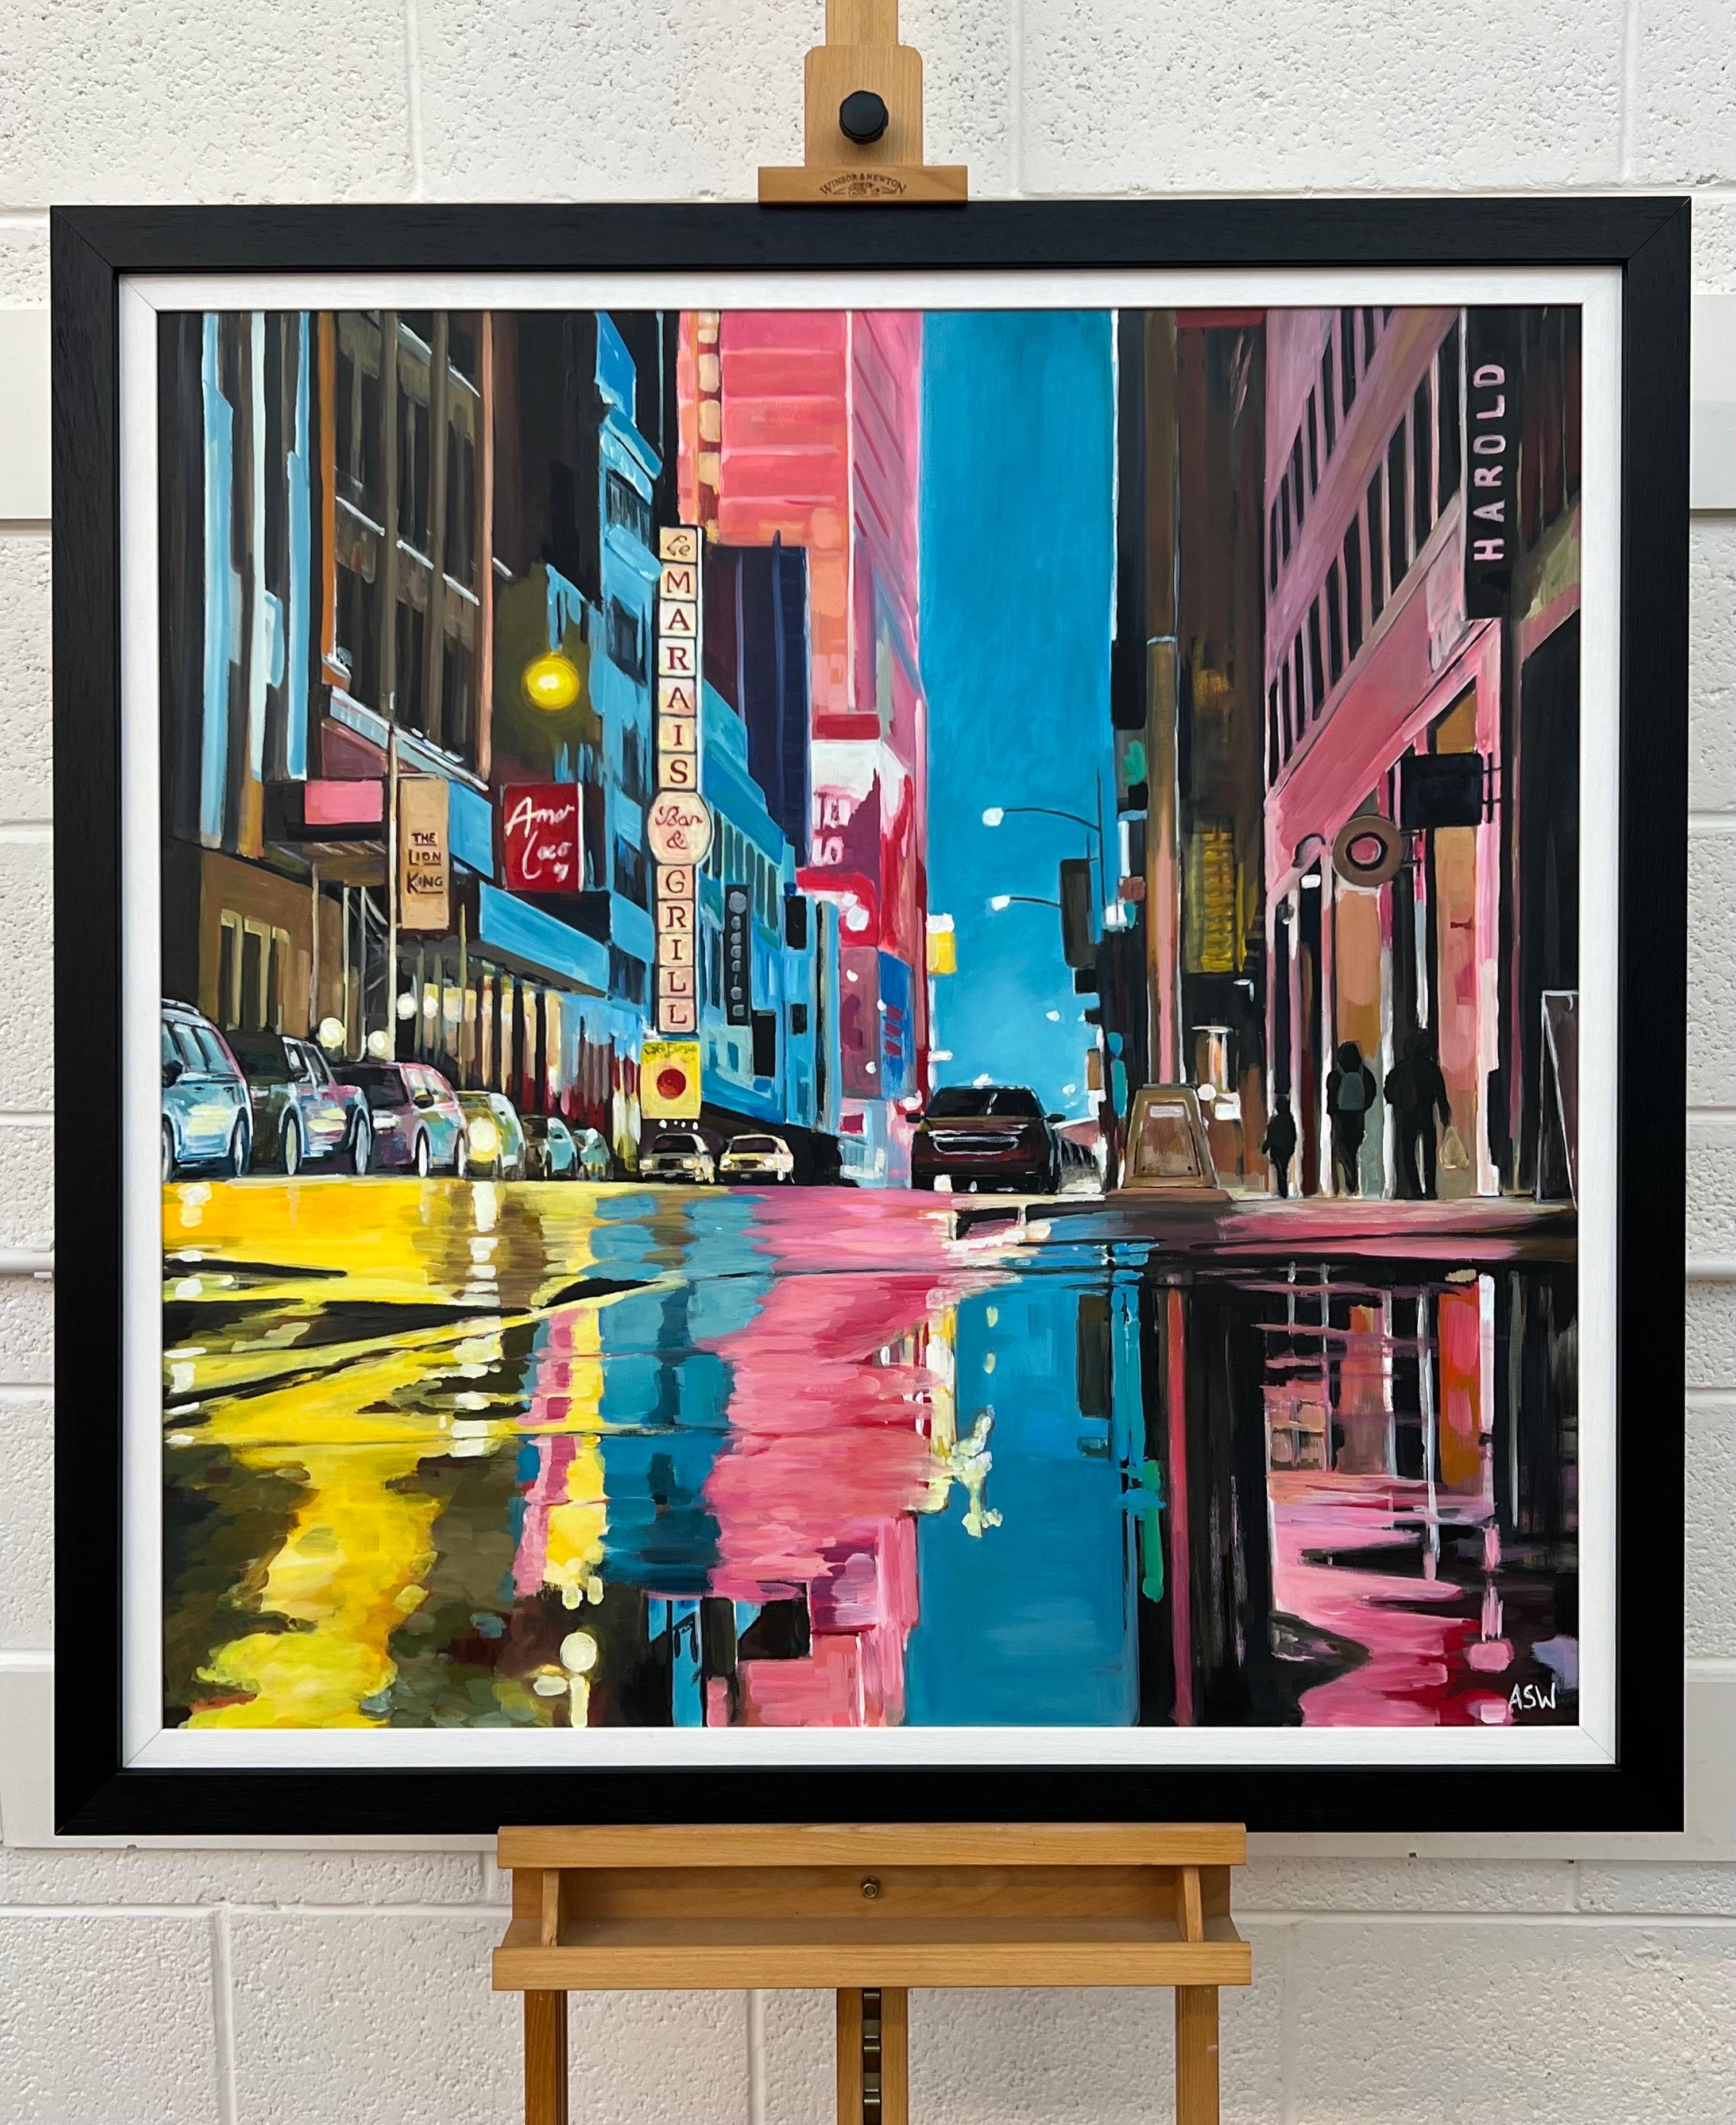 Original Painting of a Contemporary New York City Scene after the Rain, with Cars and Figures, by British Urban Landscape Artist, Angela Wakefield. This is a major work to continue her epic New York Series which now spans over a decade.

Art